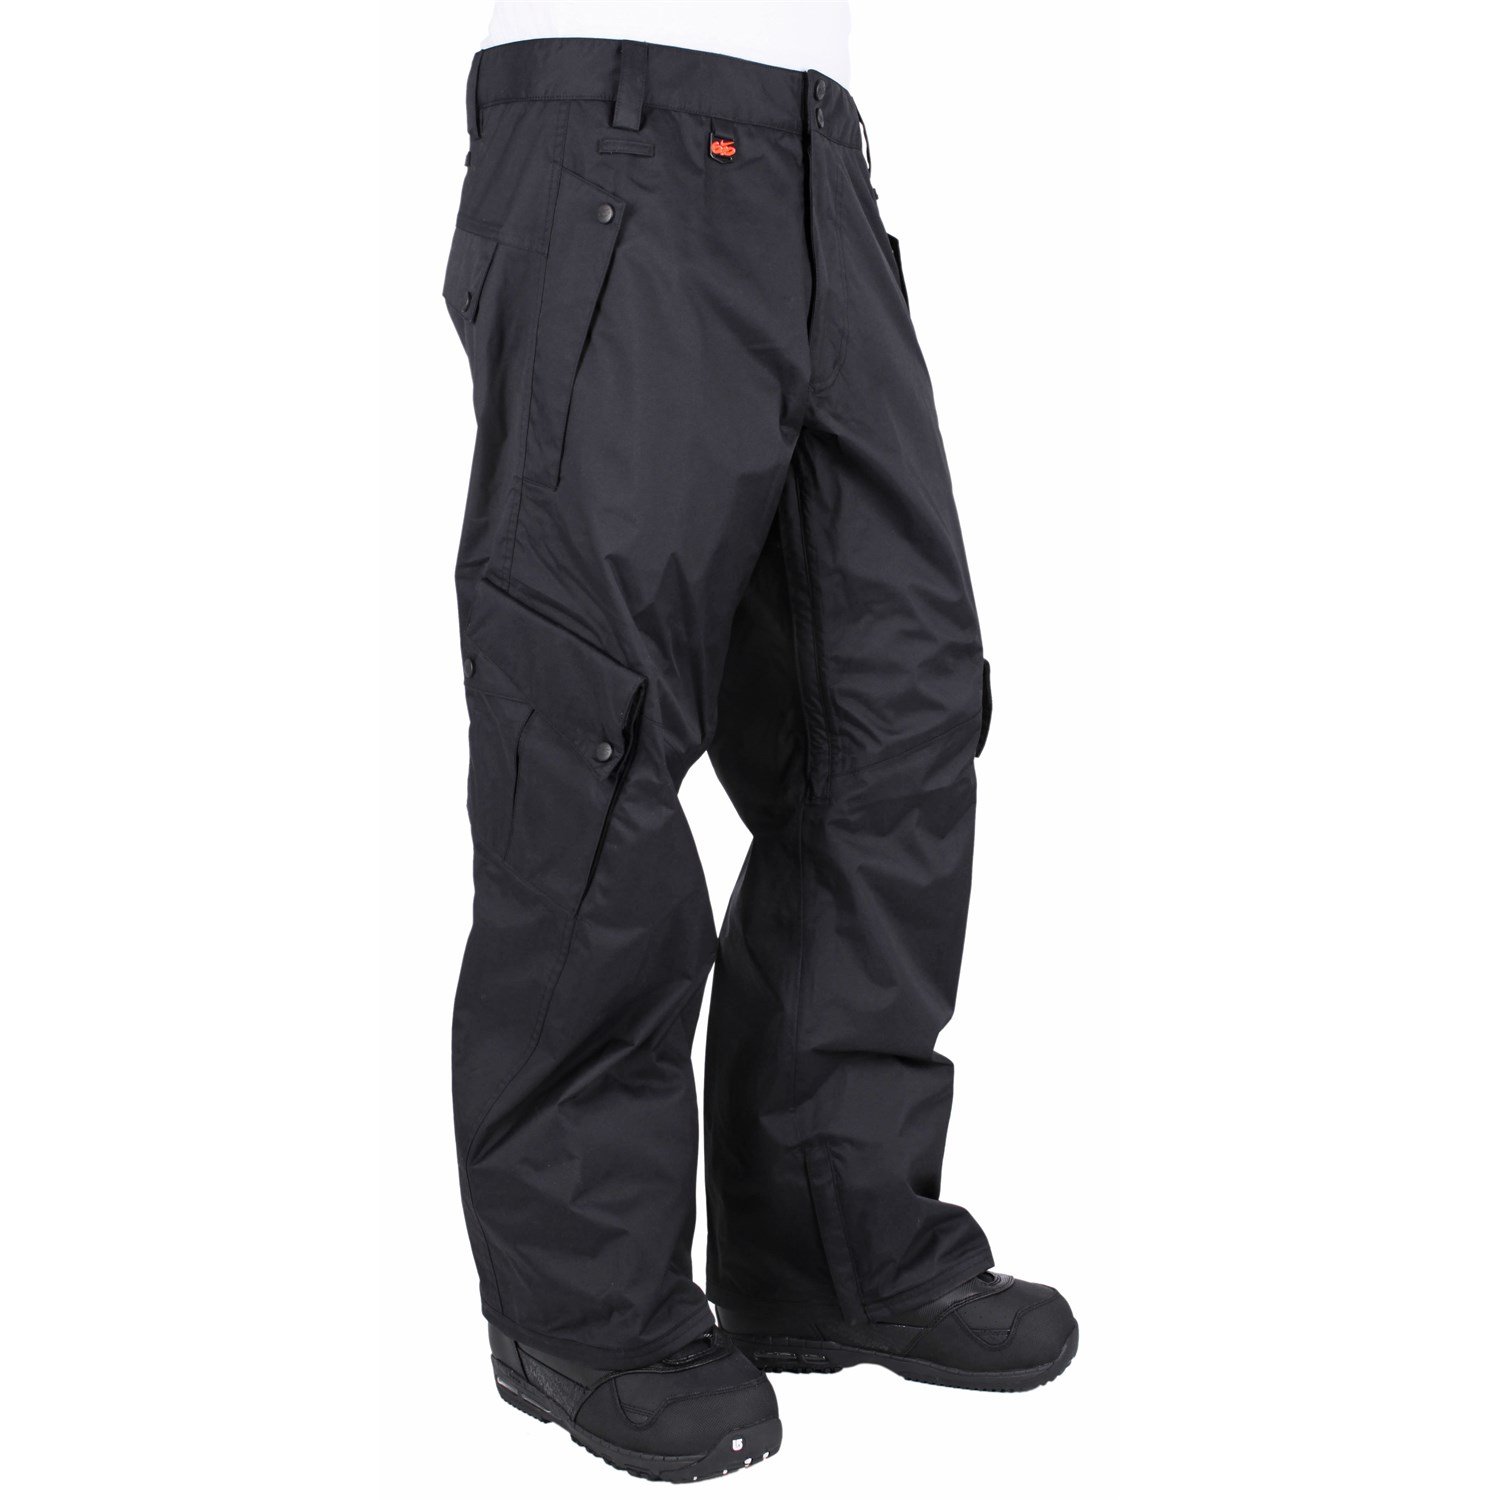 Nike 6.0 Noroc Pant 2011 - Snowboarder